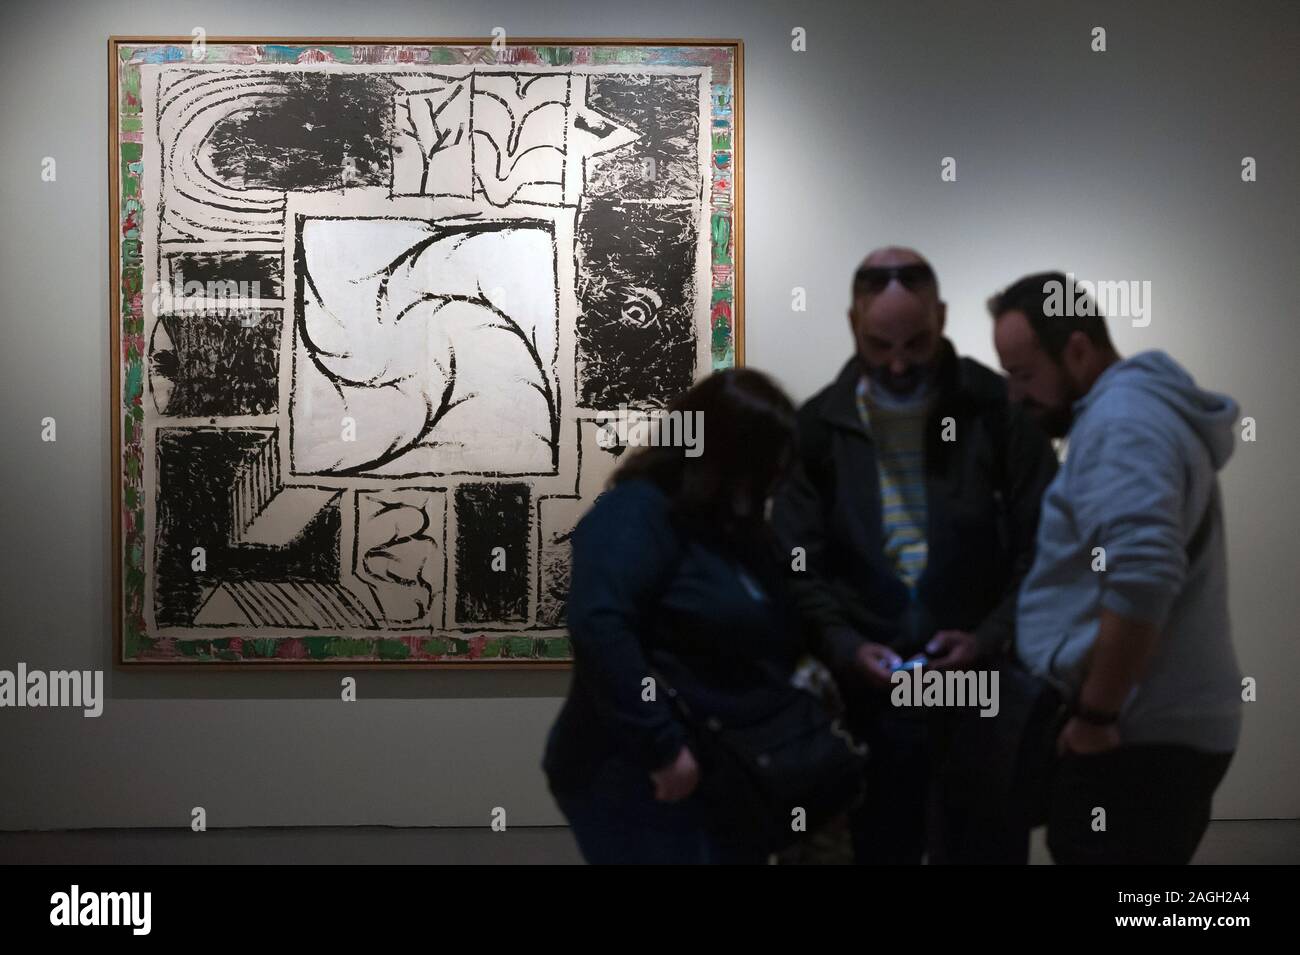 Members to the media next to a painting during the exhibition.'Alechinsky: en el país de la tinta' (Alechinsky in inkland) is an exhibition of paintings and drawings by Belgian artist, Pierre Alechinsky at museum Centre Pompidou. The exhibition runs from 19th Dec 2019 to 12th April 2020. Stock Photo